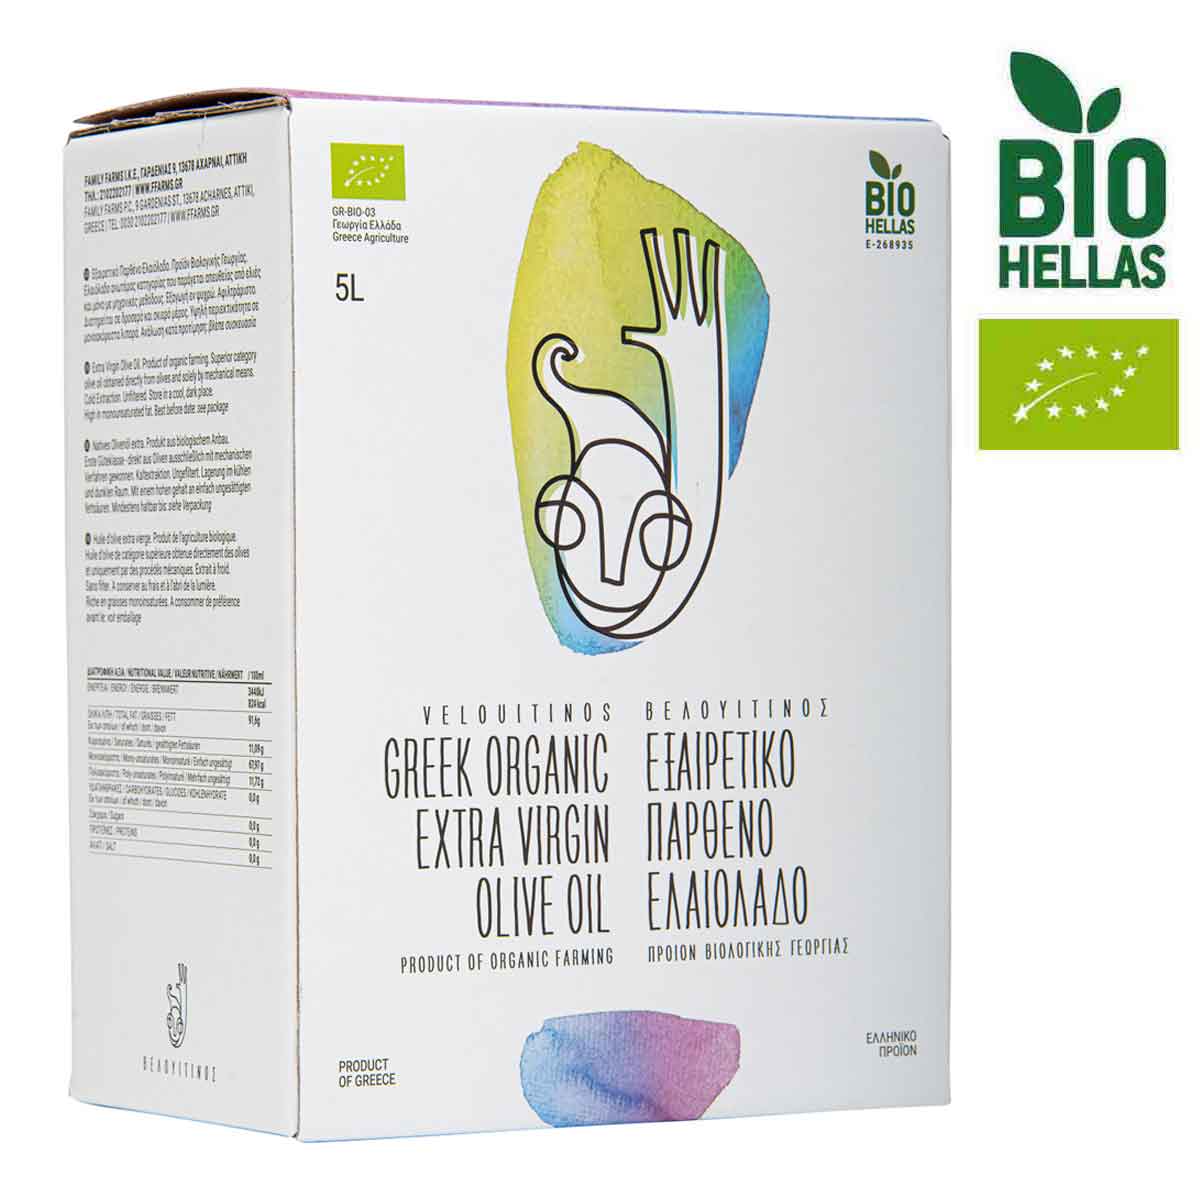 Organic Extra Virgin Olive Oil in a convenient "Bag in Box" packaging with tap, 5lit, "Velouitinos"